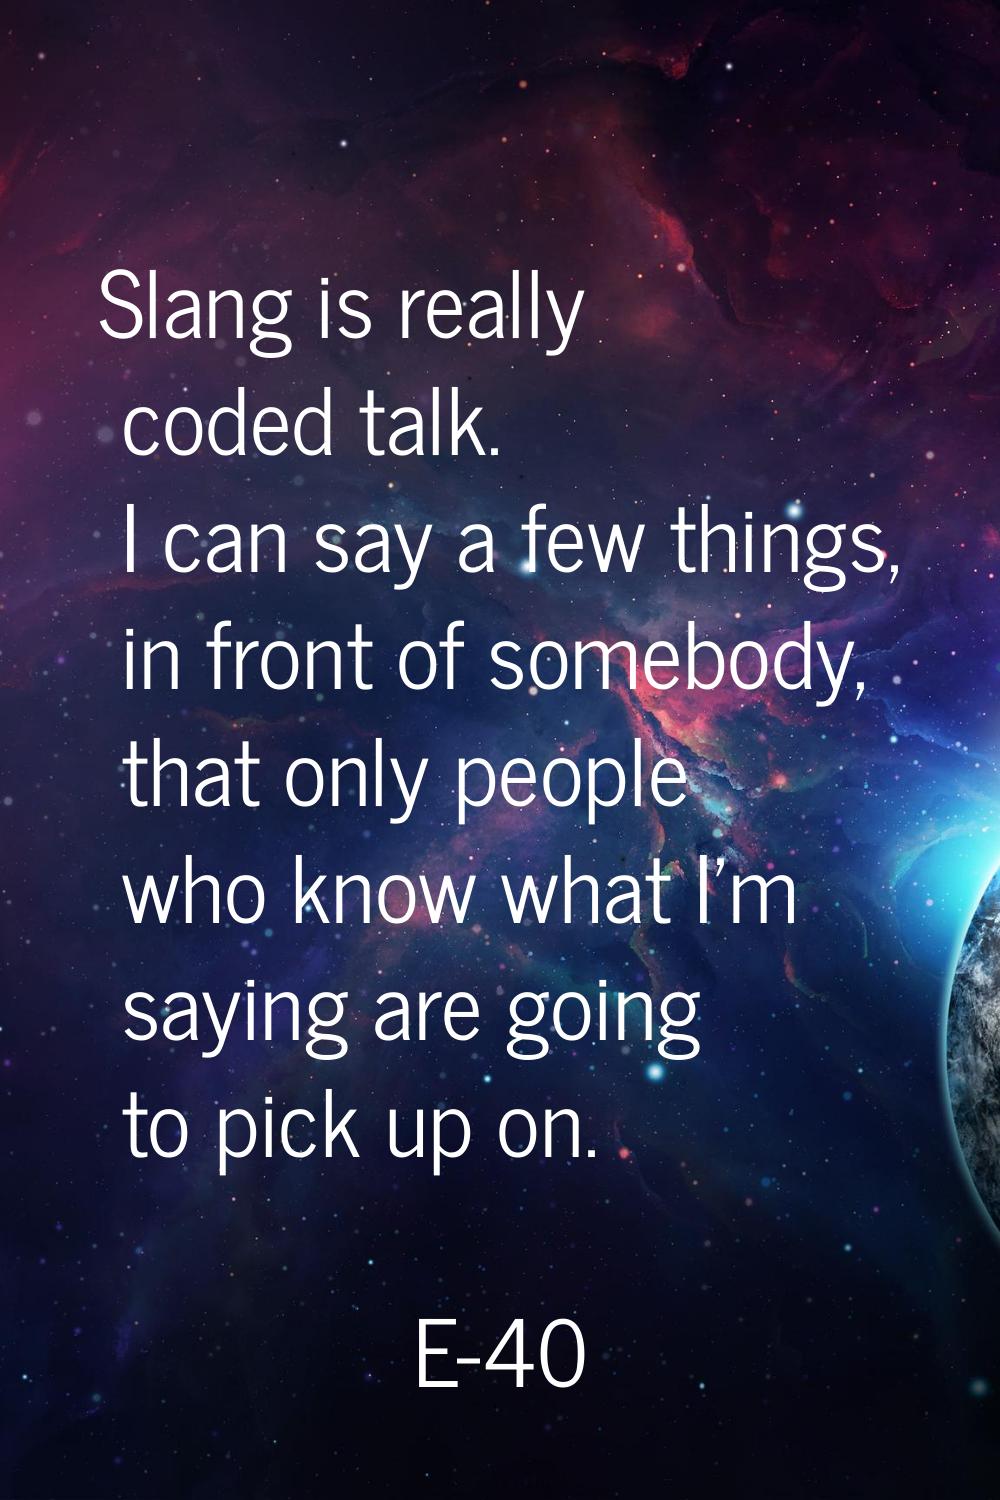 Slang is really coded talk. I can say a few things, in front of somebody, that only people who know